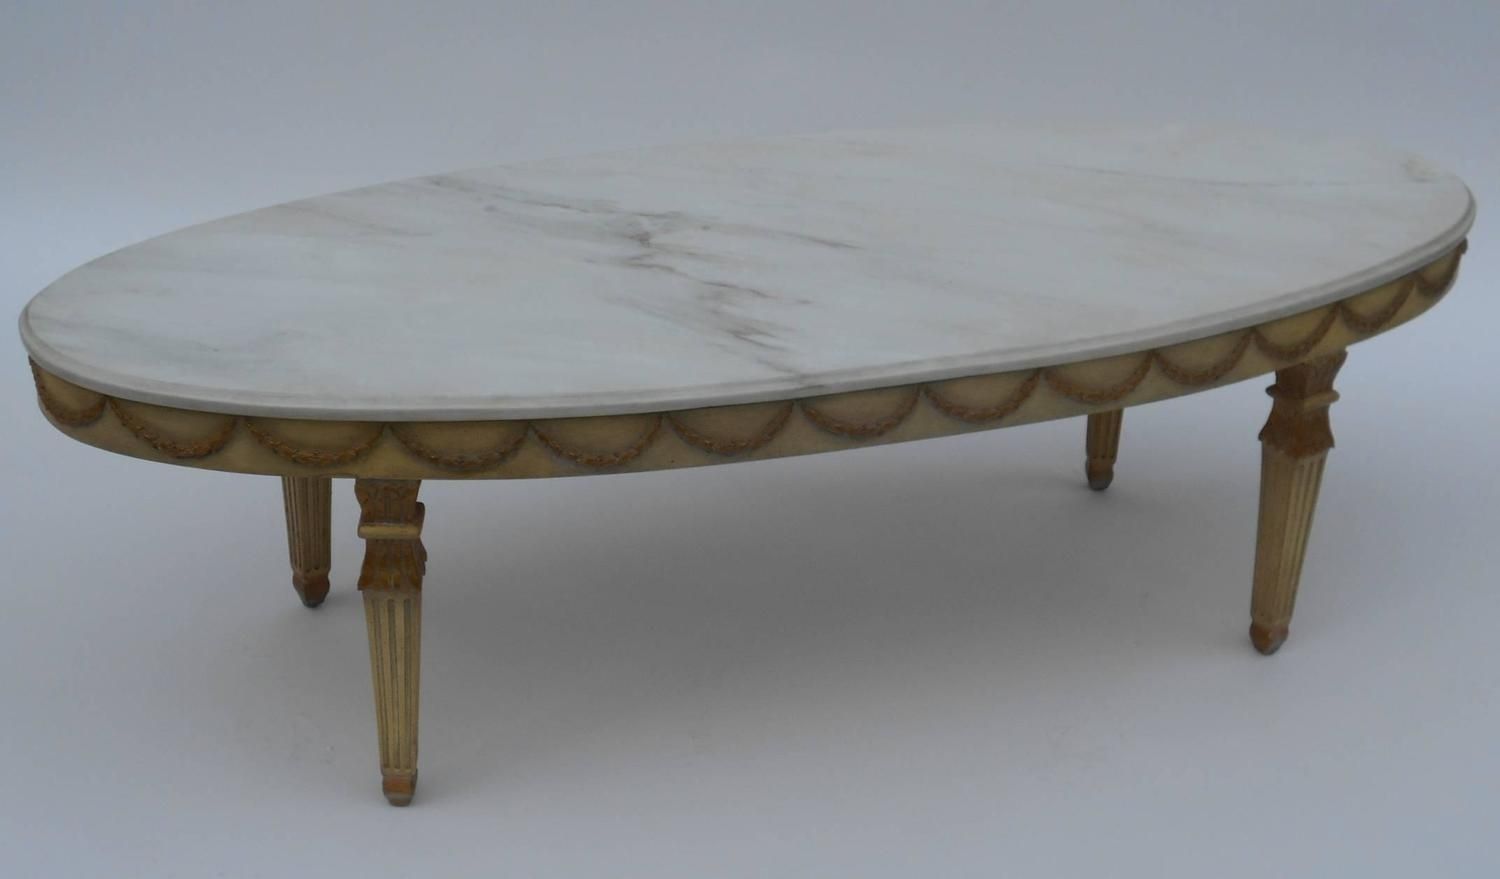 Italian Marble Top Coffee Table At 1stdibs Pertaining To Smart Large Round Marble Top Coffee Tables (View 23 of 30)